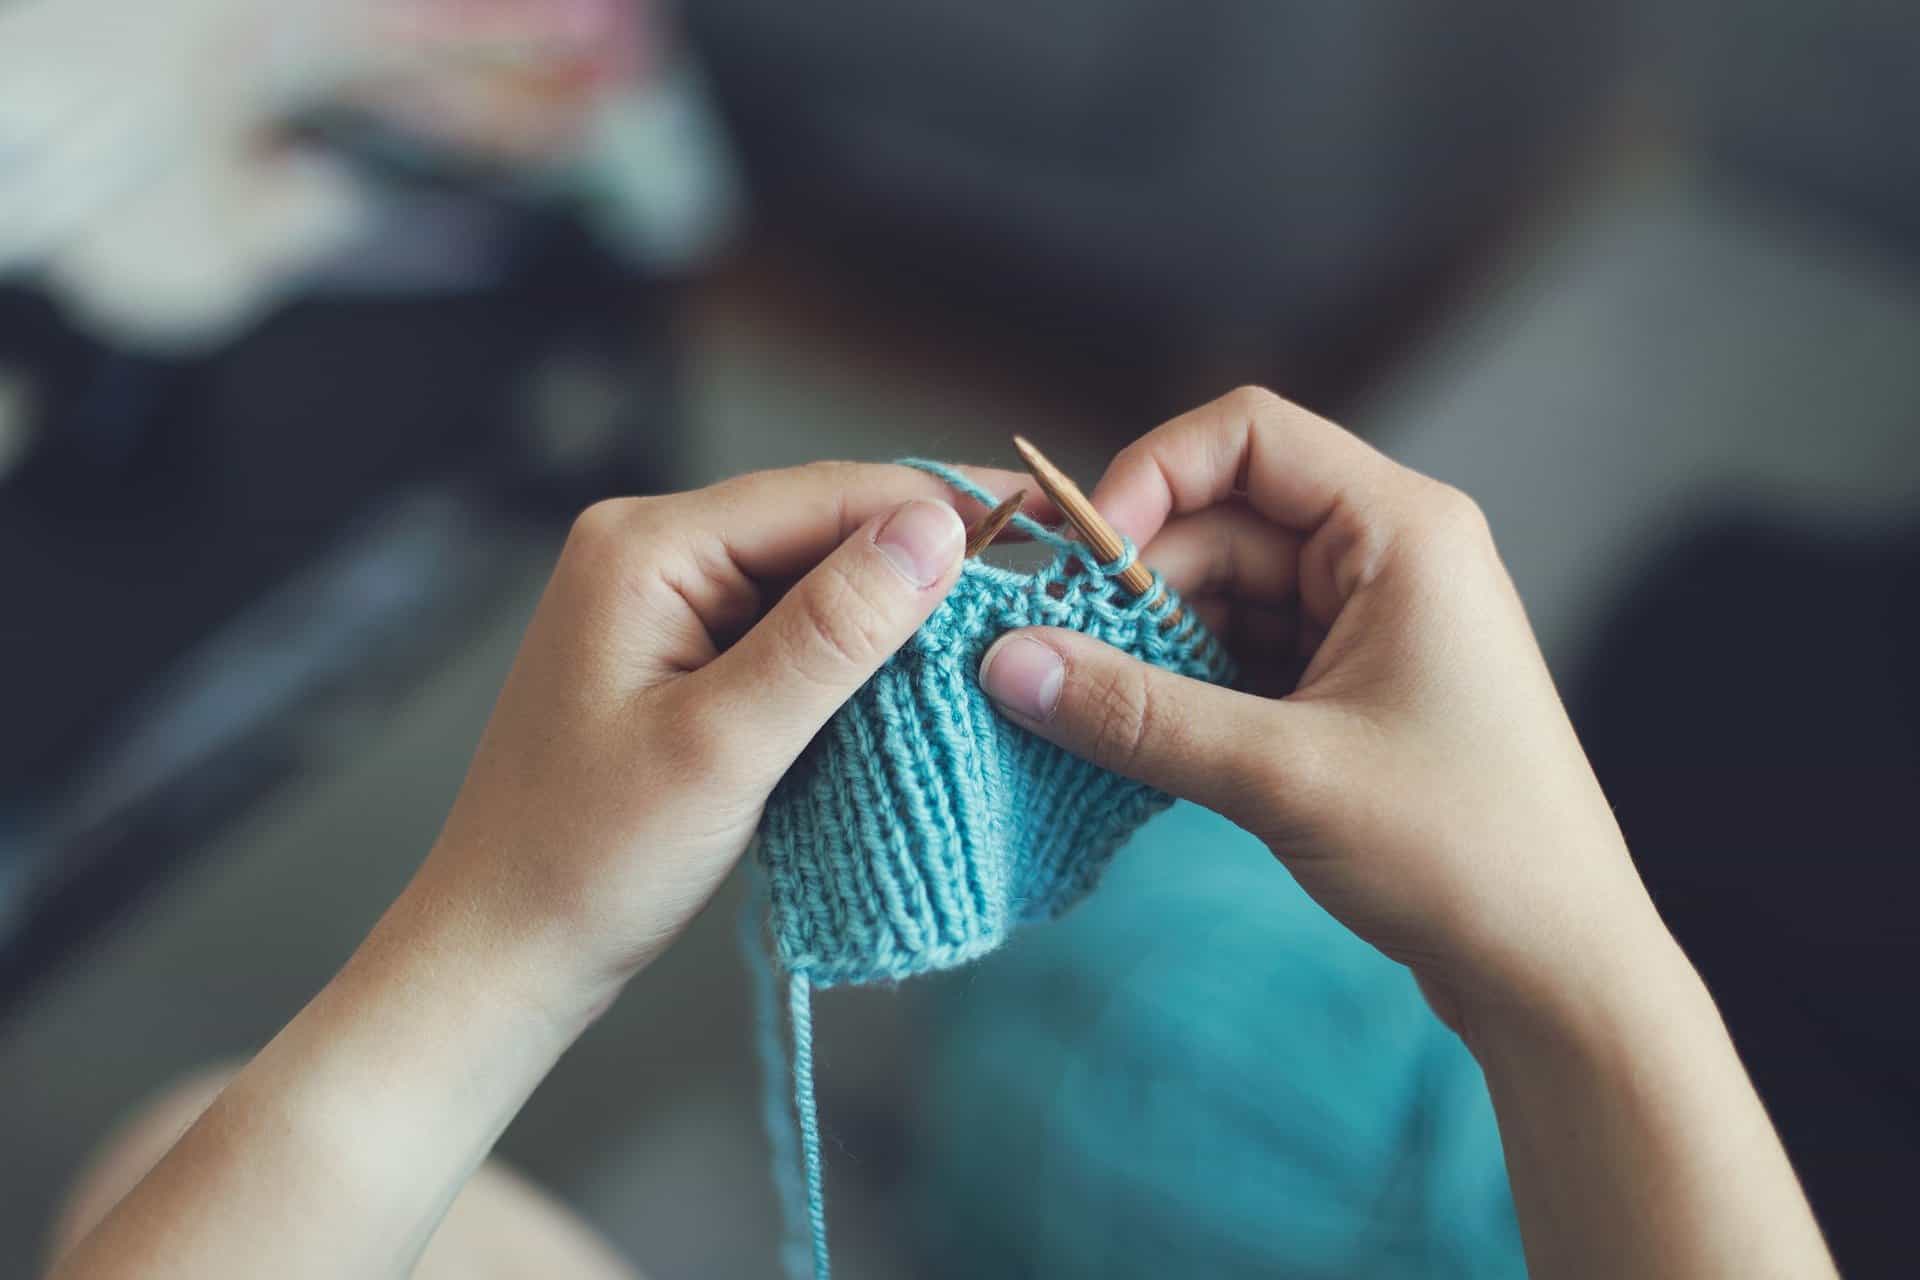 Why your team should take up knitting